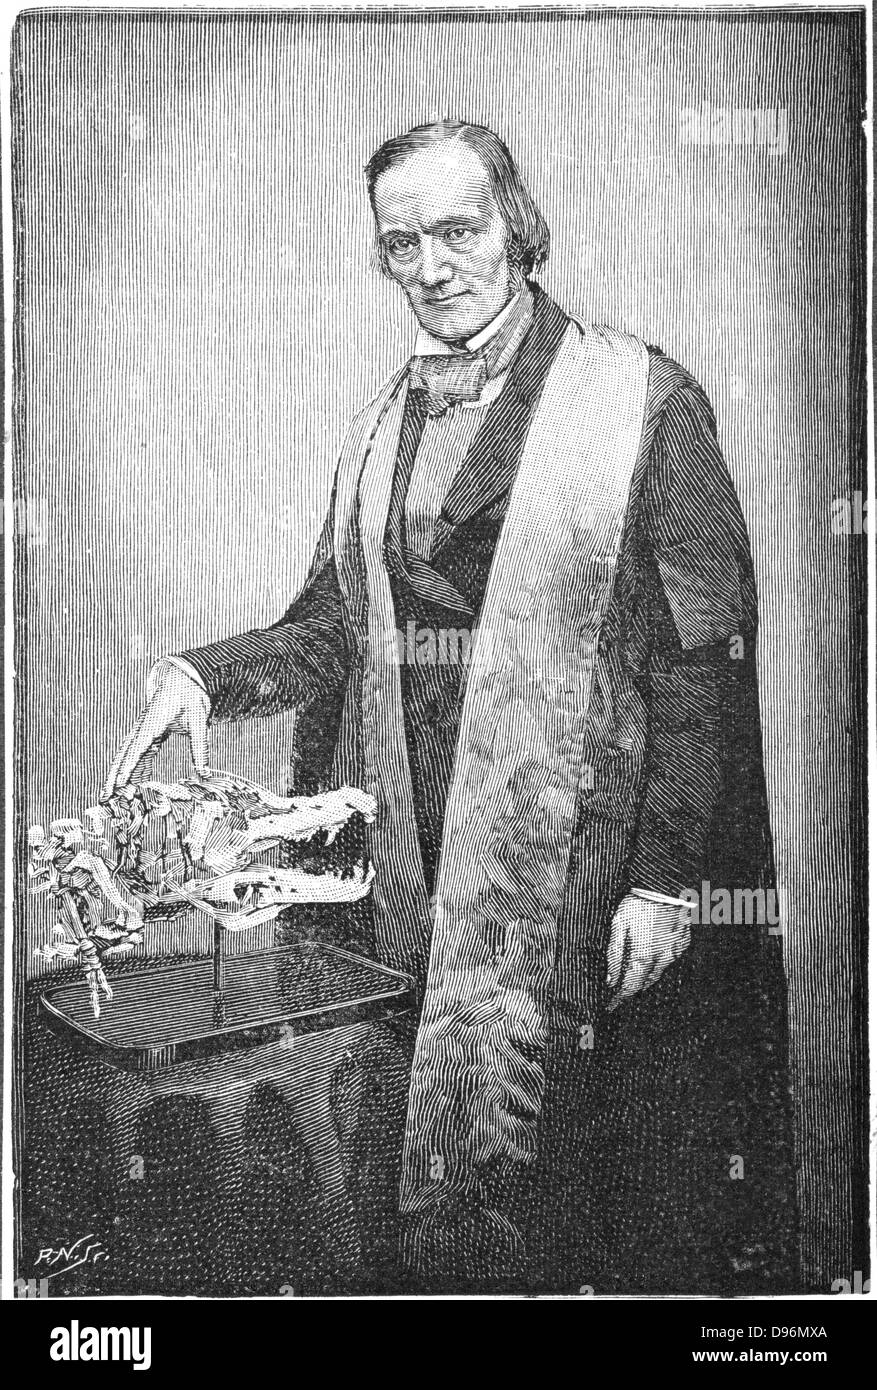 Richard Owen (1804-1892) British naturalist, at the age of 52. Coined term 'Dinosaur' (1841). Opposed Darwin and evolution. From 'The Strand Magazine', London, 1891. Engraving Stock Photo